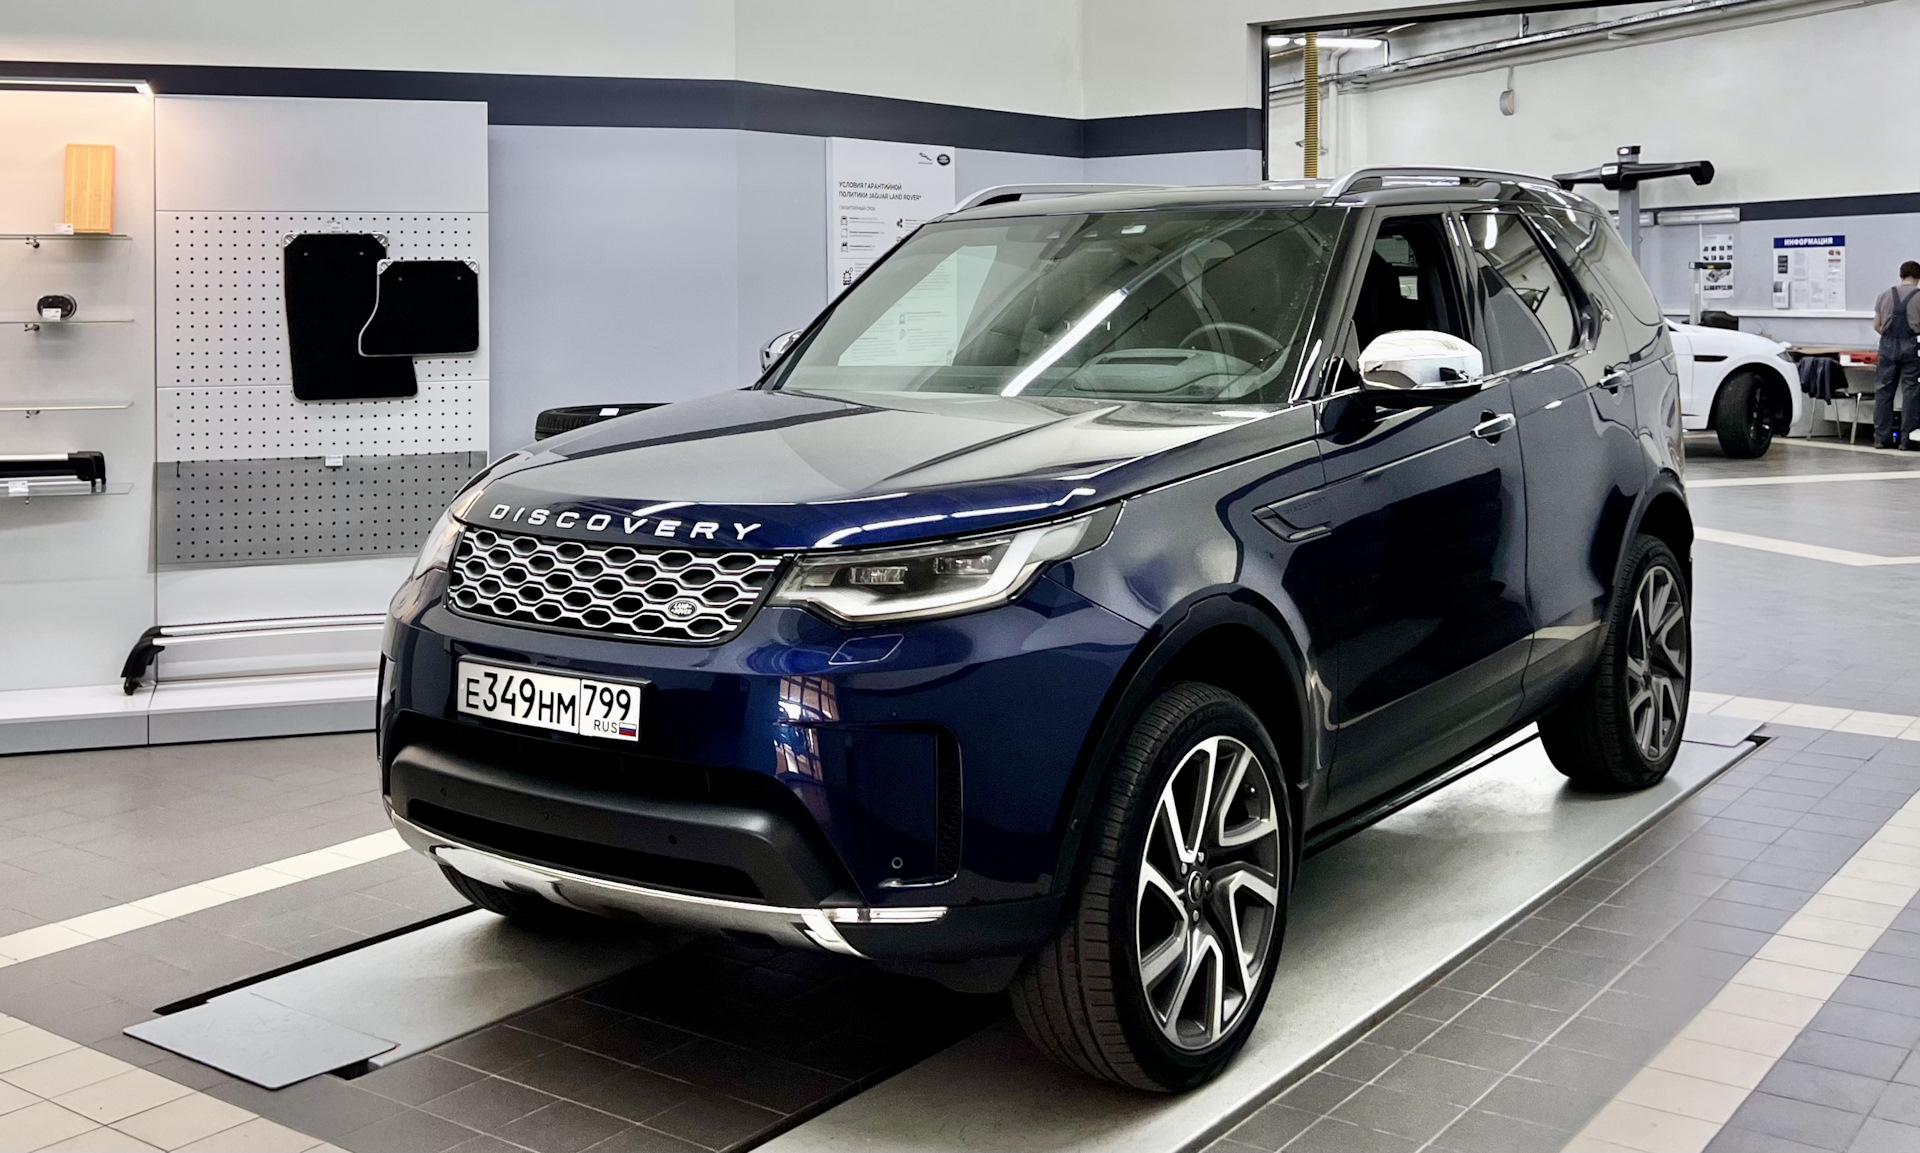 Discovery 5. Дискавери 5 и Дискавери спорт. Land Rover Discovery 5 2.0 синего. Дискавери 5 лифт. Дискавери 2018